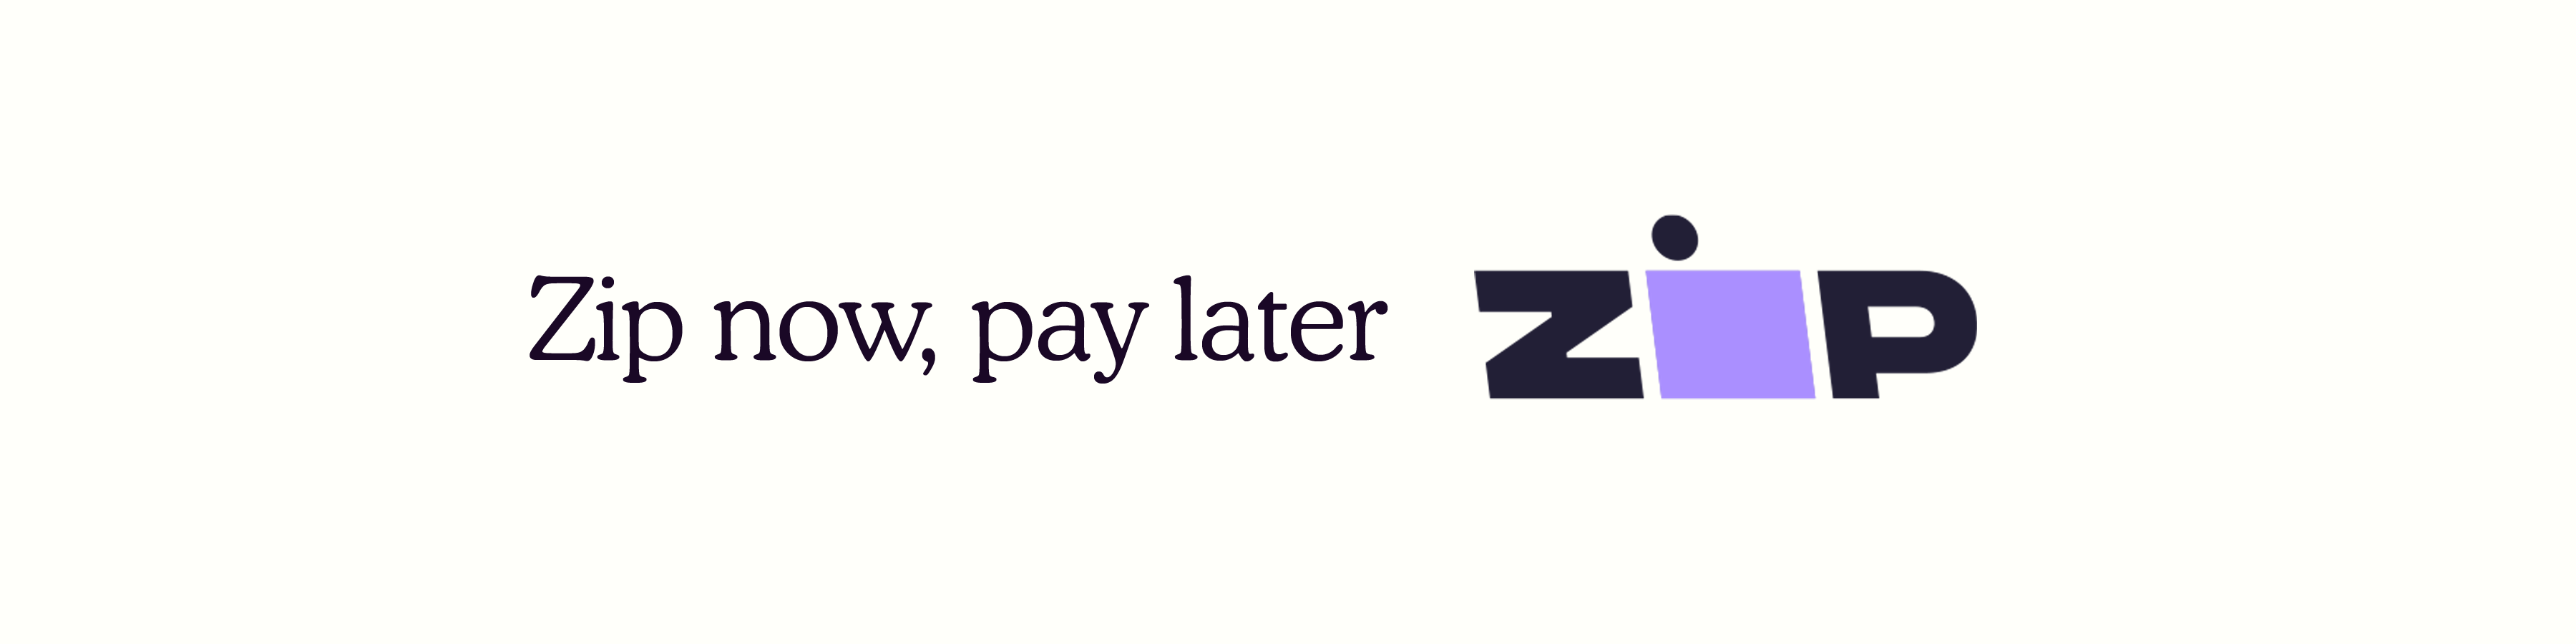 Zip now pay later banner